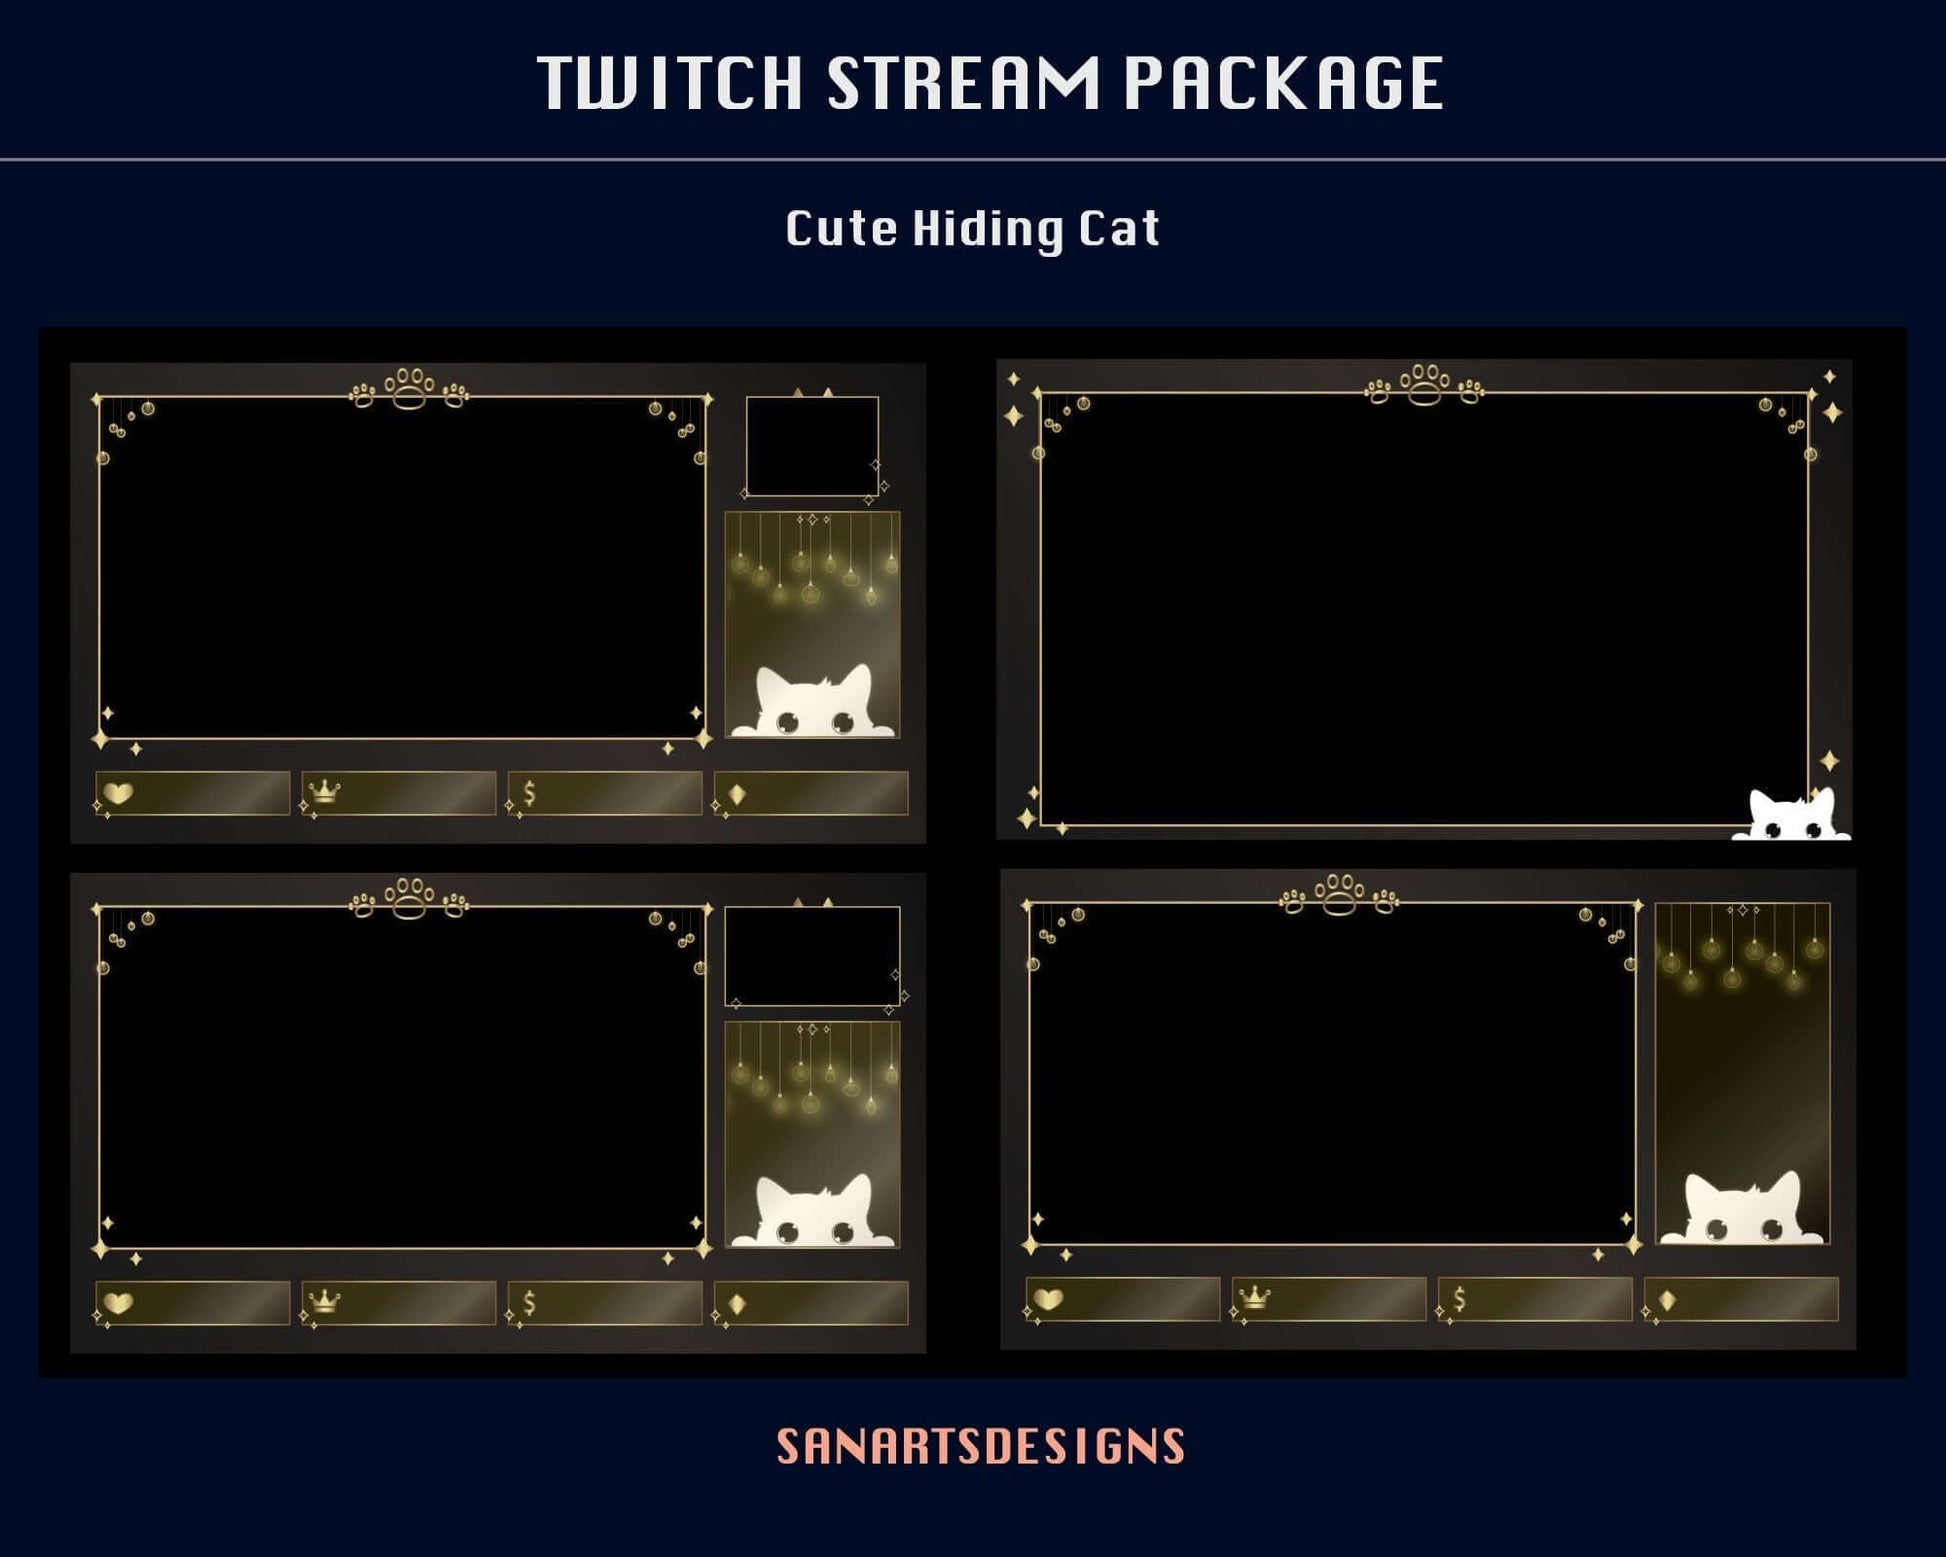 Animated Stream Package Gold Cute Hiding Cat - Package - Stream K-Arts